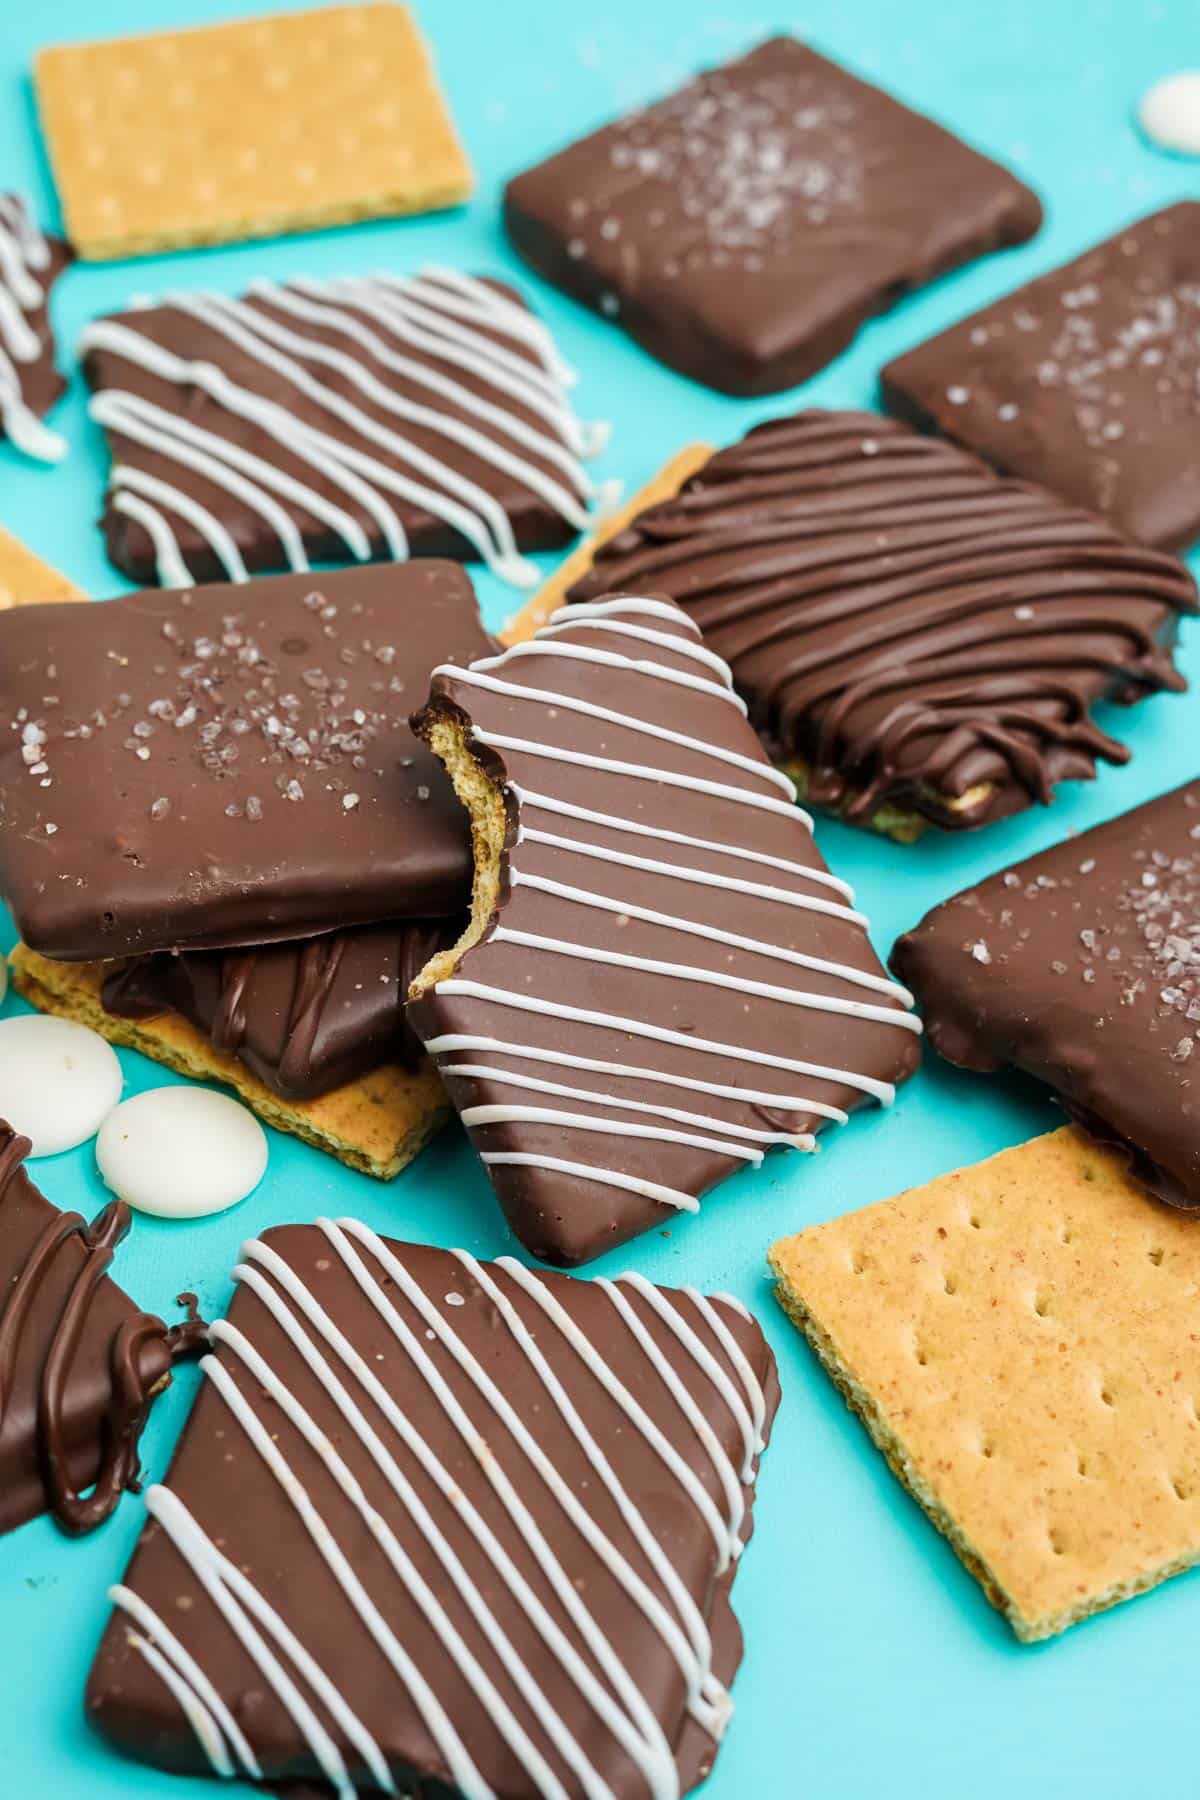 Chocolate covered graham crackers on the table, one with a bite taken.